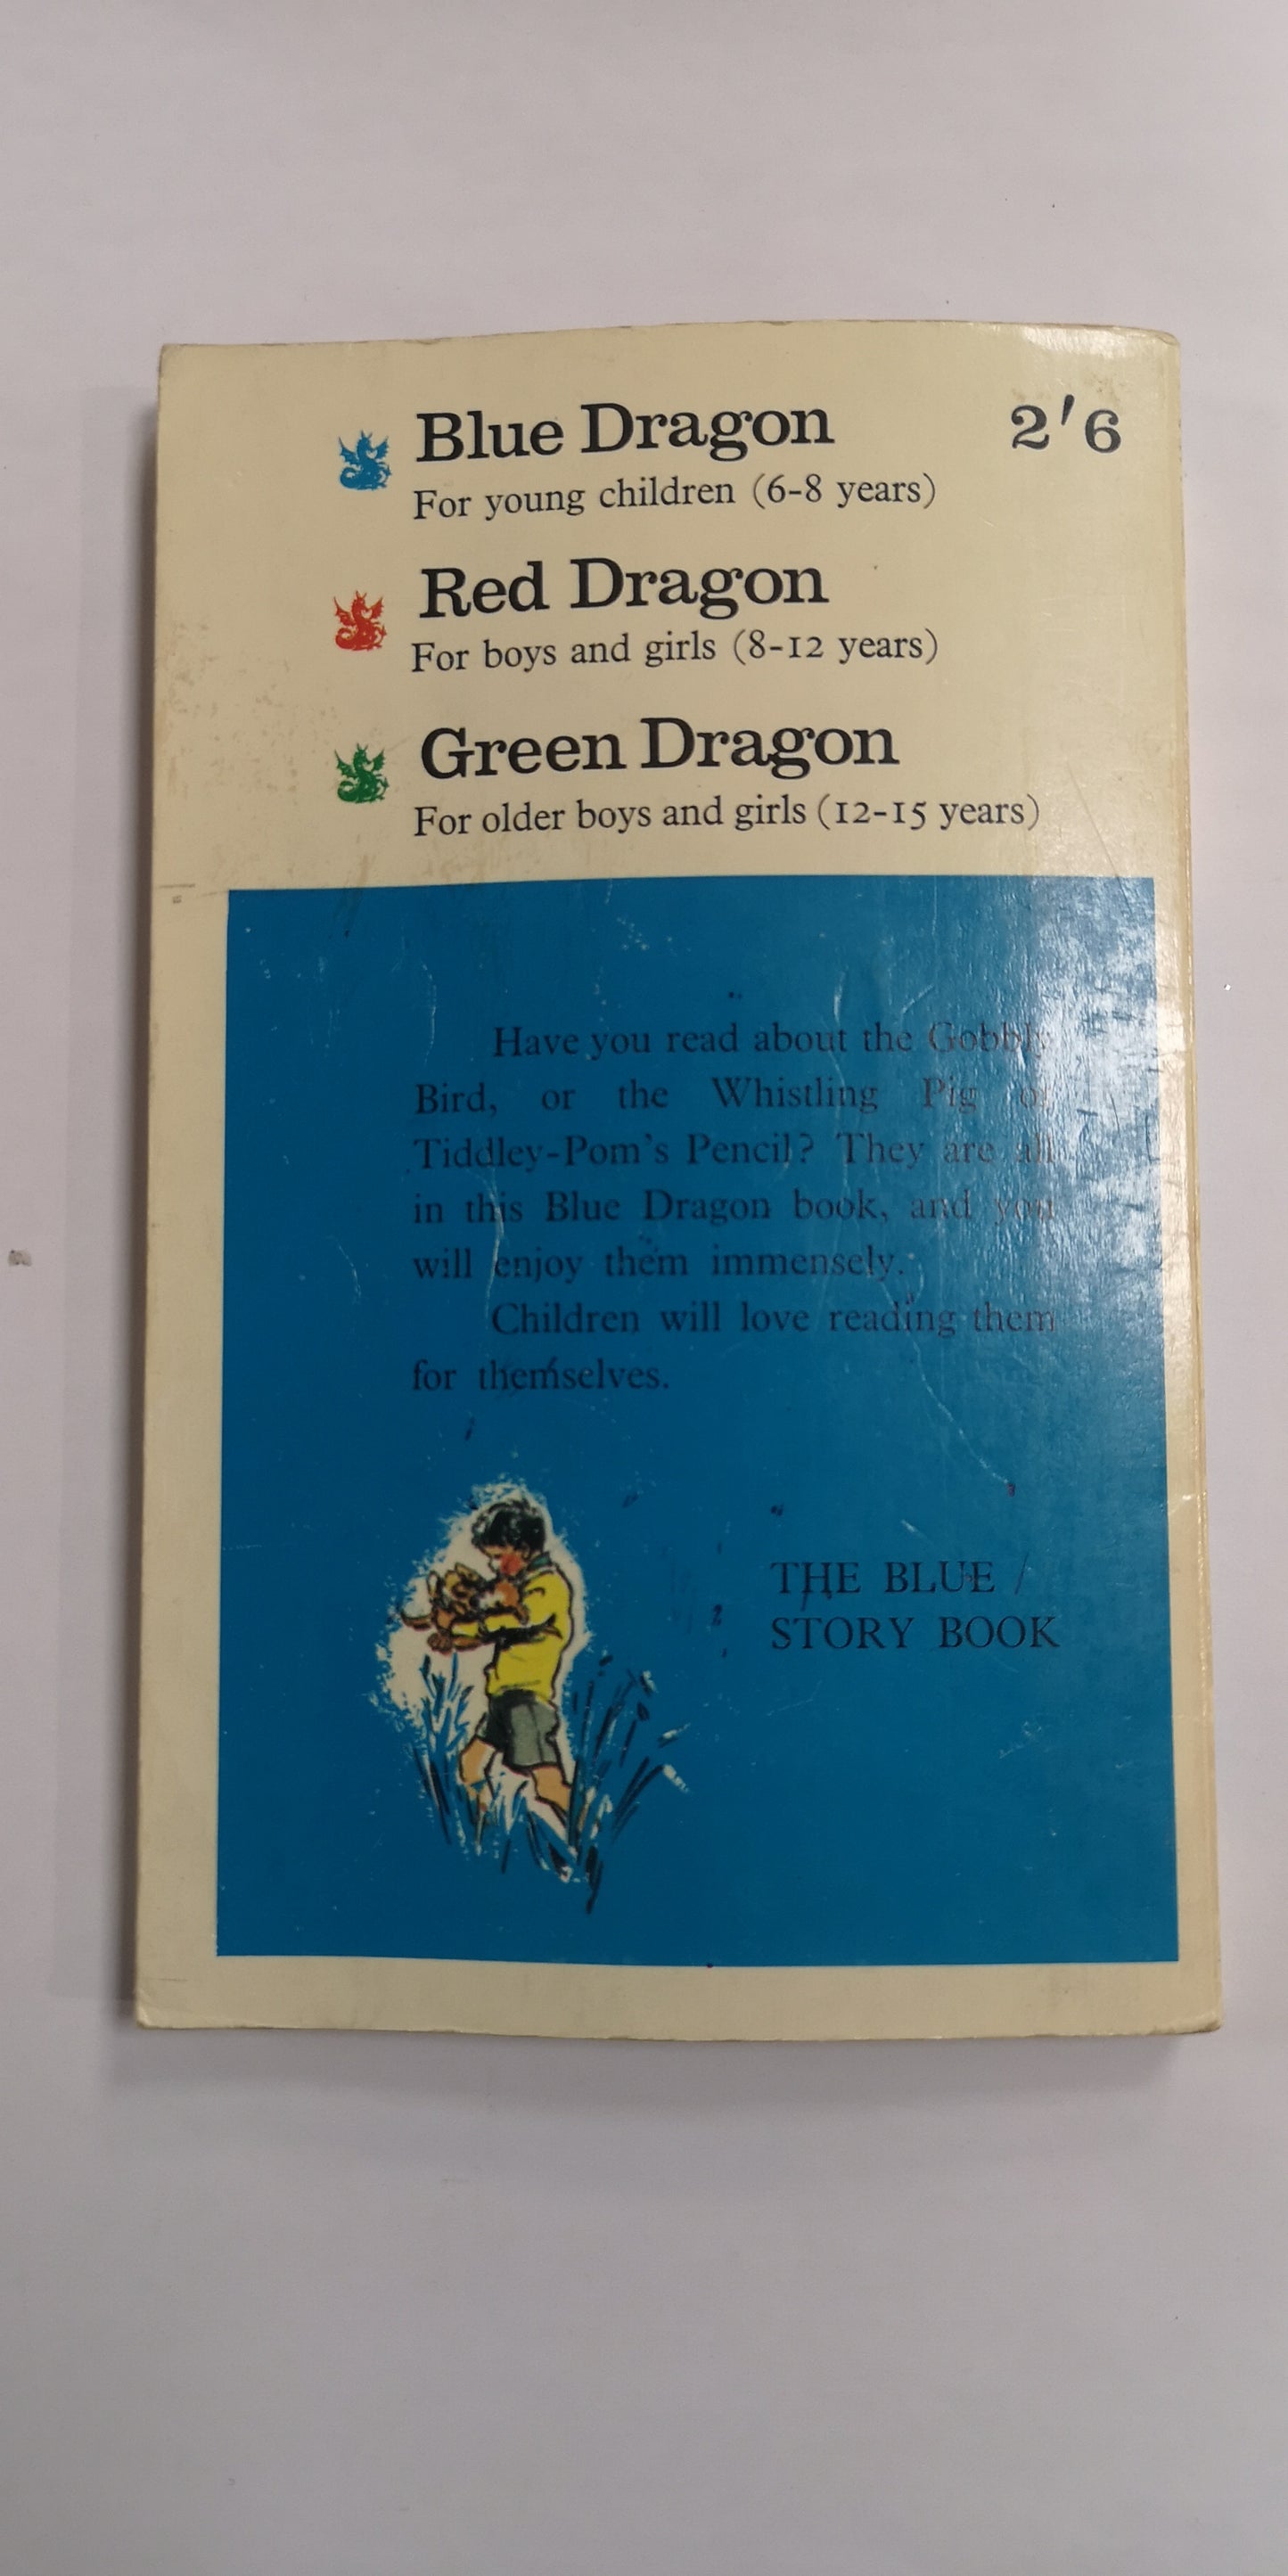 The Blue Story Book by Enid Blyton